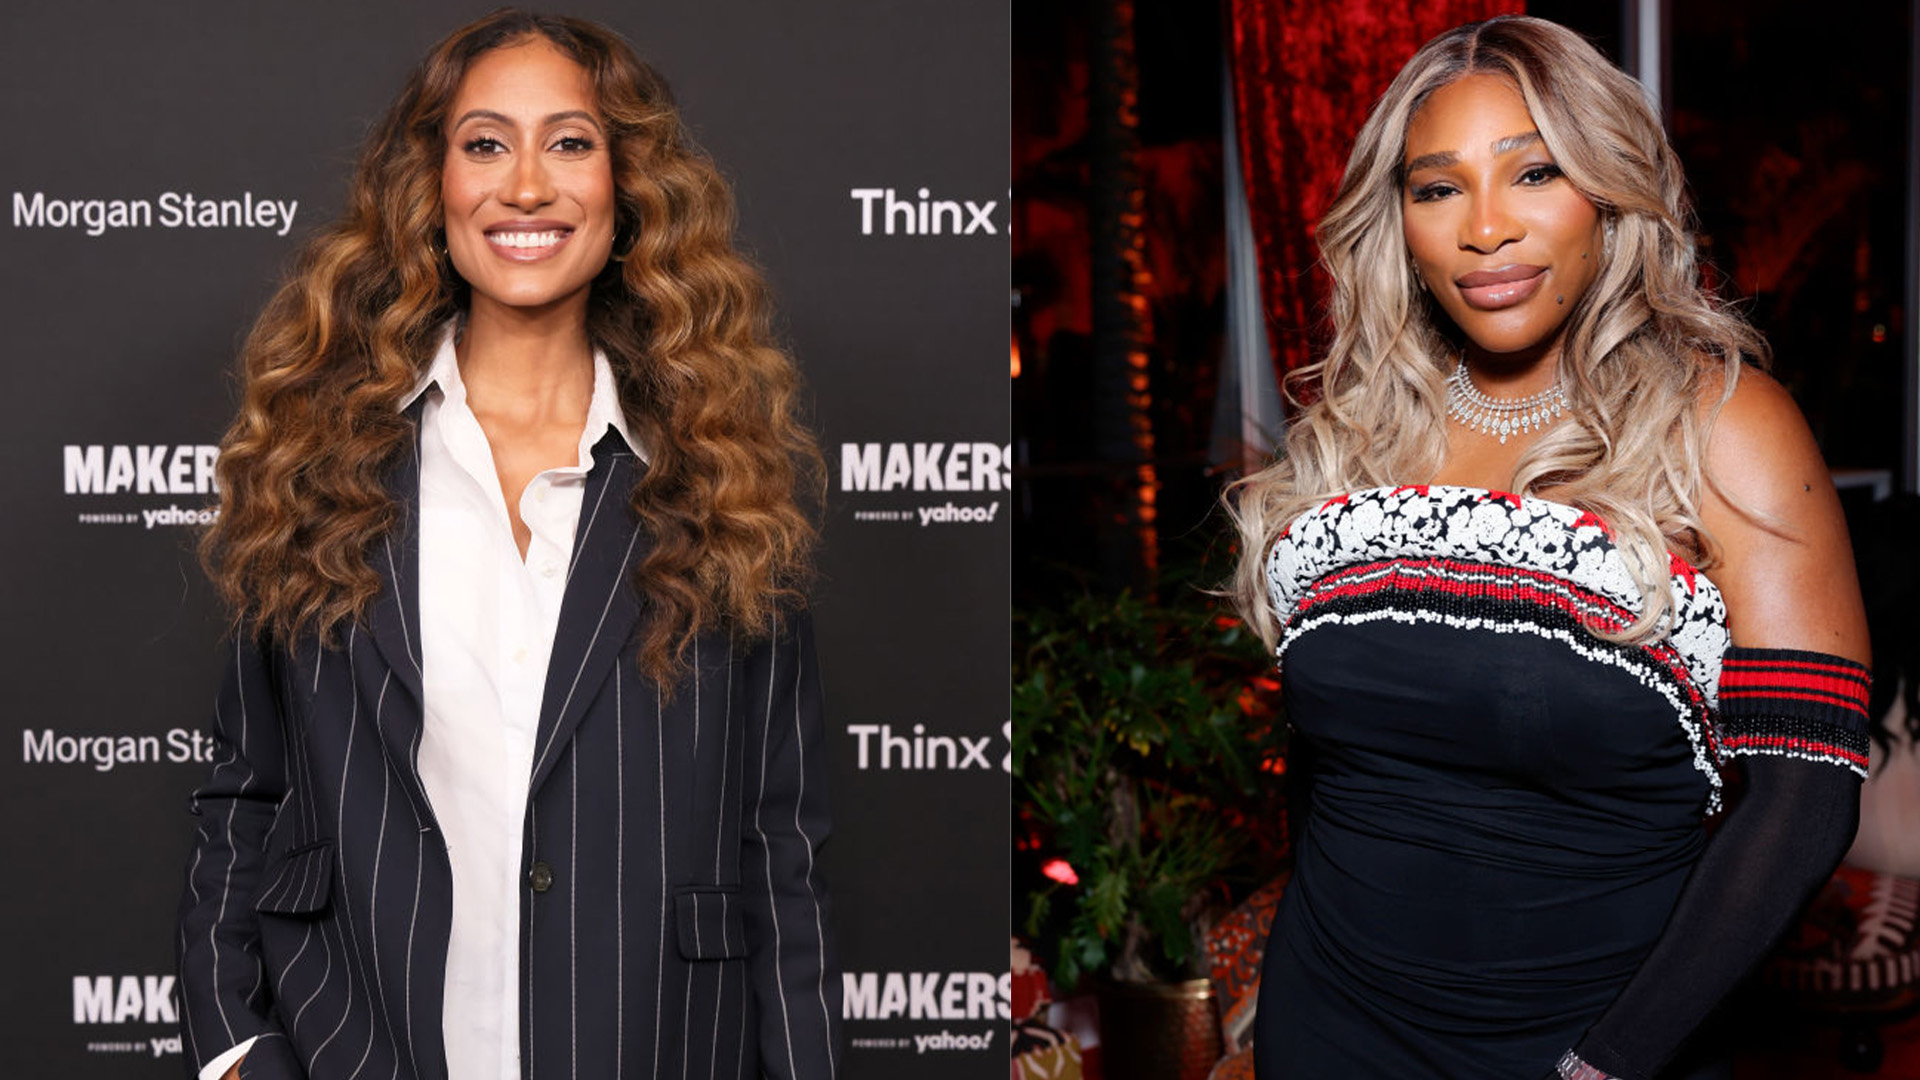 Elaine Welteroth Founds Birth Fund With Serena Williams' Backing To Pay Costs For Midwifery Care For Families